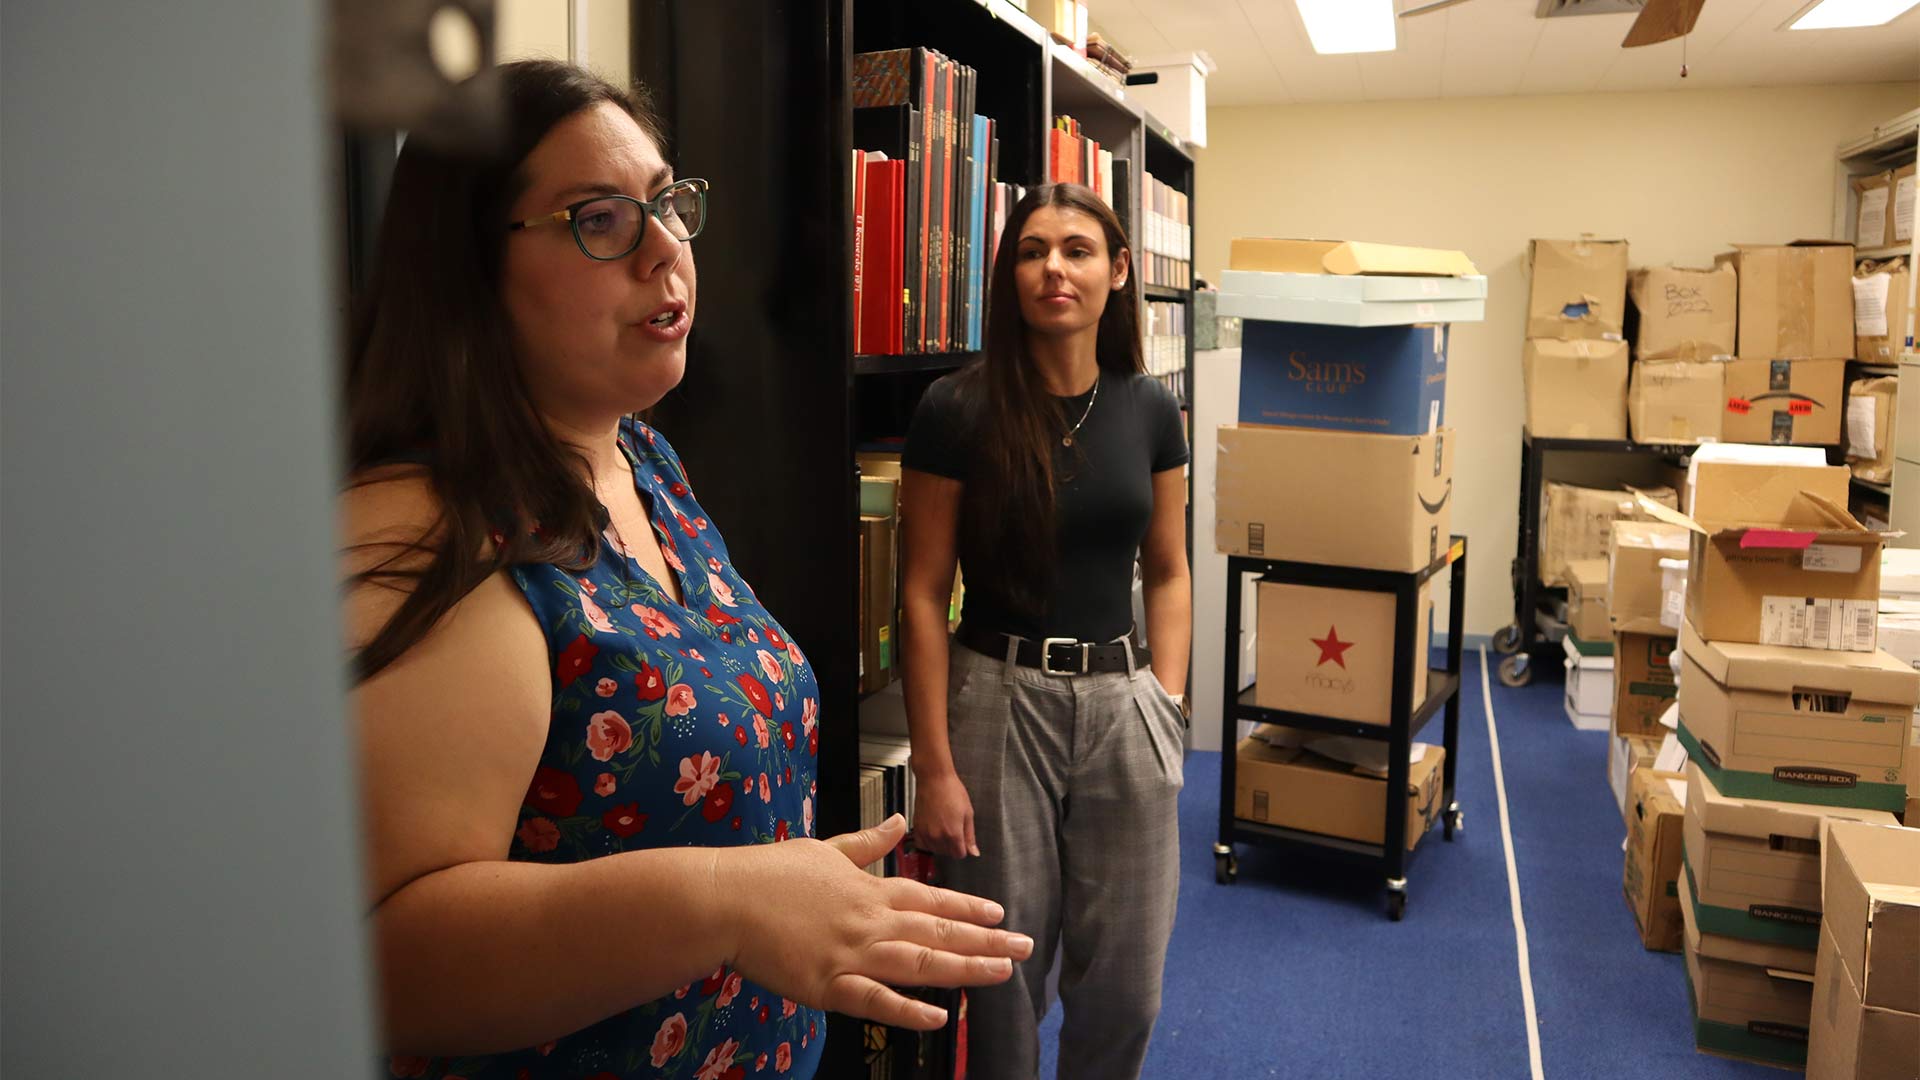 Cochise College Director of Library Services Karly Scarbrough (left) and Cochise College Librarian Archivist Ashlee Gray (right) discuss the beginnings of their Archiving Project, which aims to build a travelling display of past commencement programs. August 31, 2023.